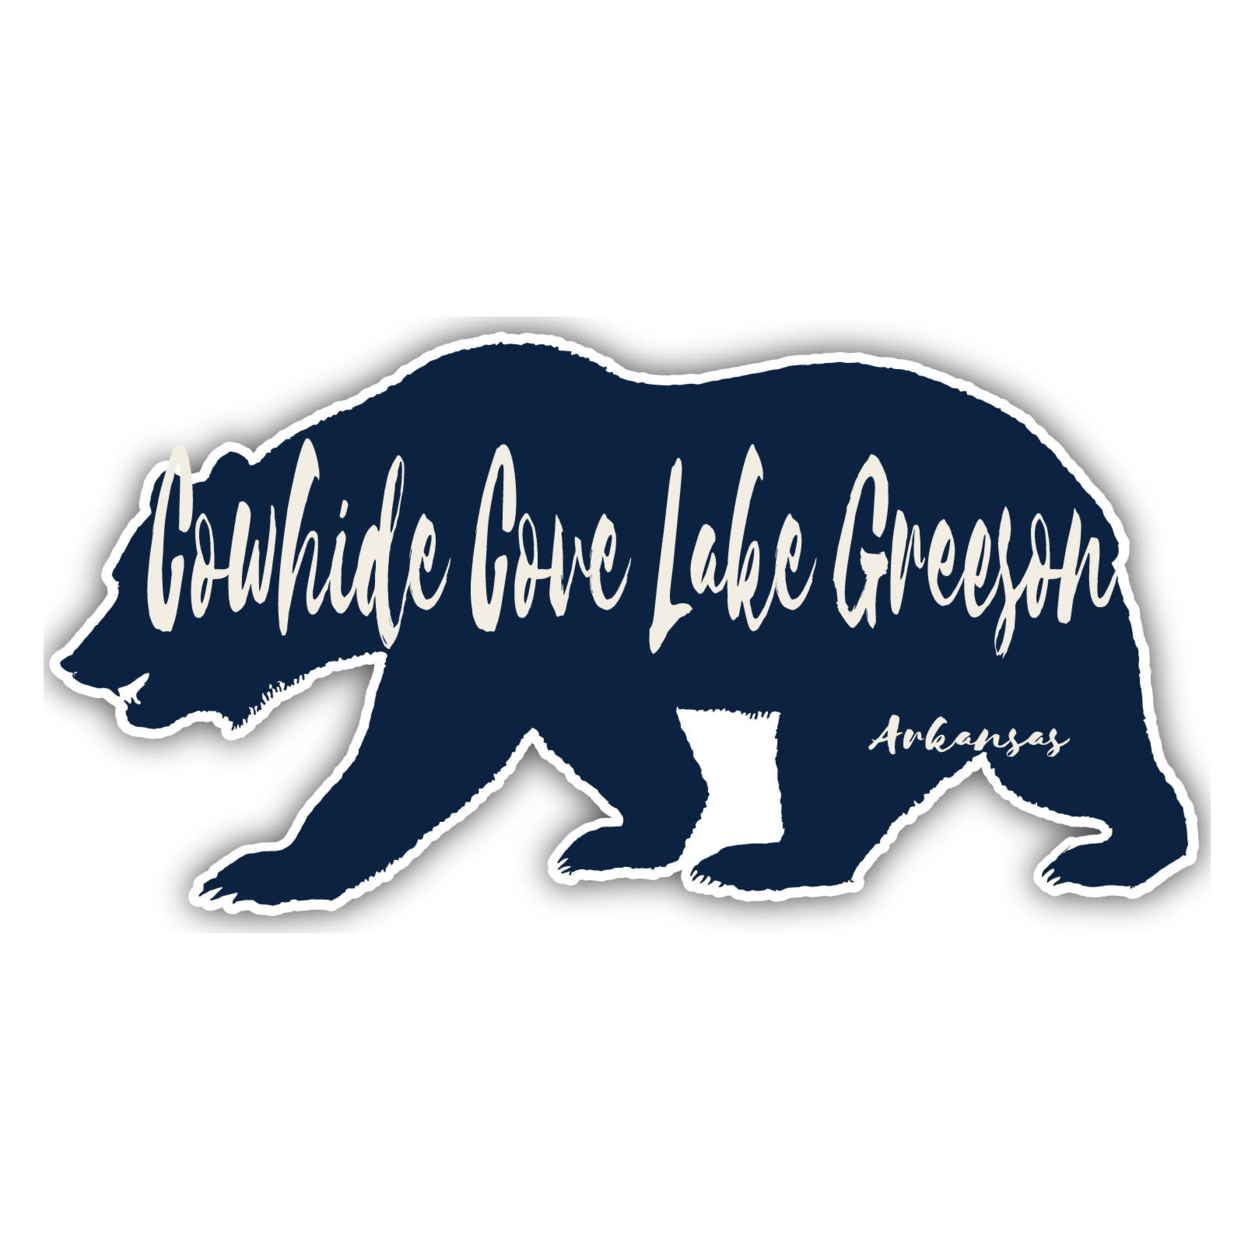 Cowhide Cove Lake Greeson Arkansas Souvenir Decorative Stickers (Choose Theme And Size) - 4-Pack, 10-Inch, Tent